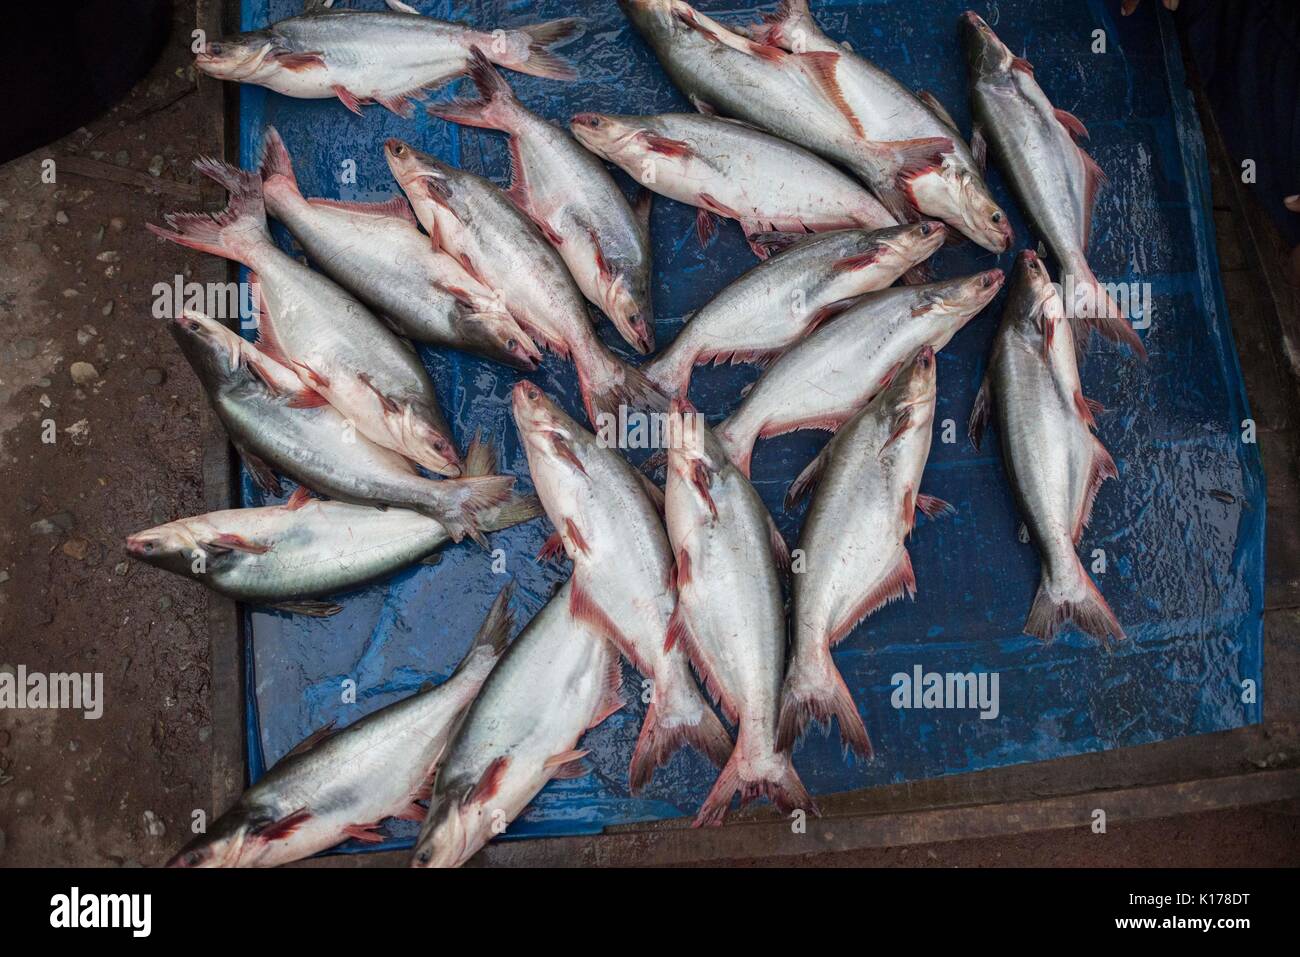 This fish is call pangas fish or in scientific name 'Pangasius'. Lots of this collect which are sold both local and foreign market. Stock Photo